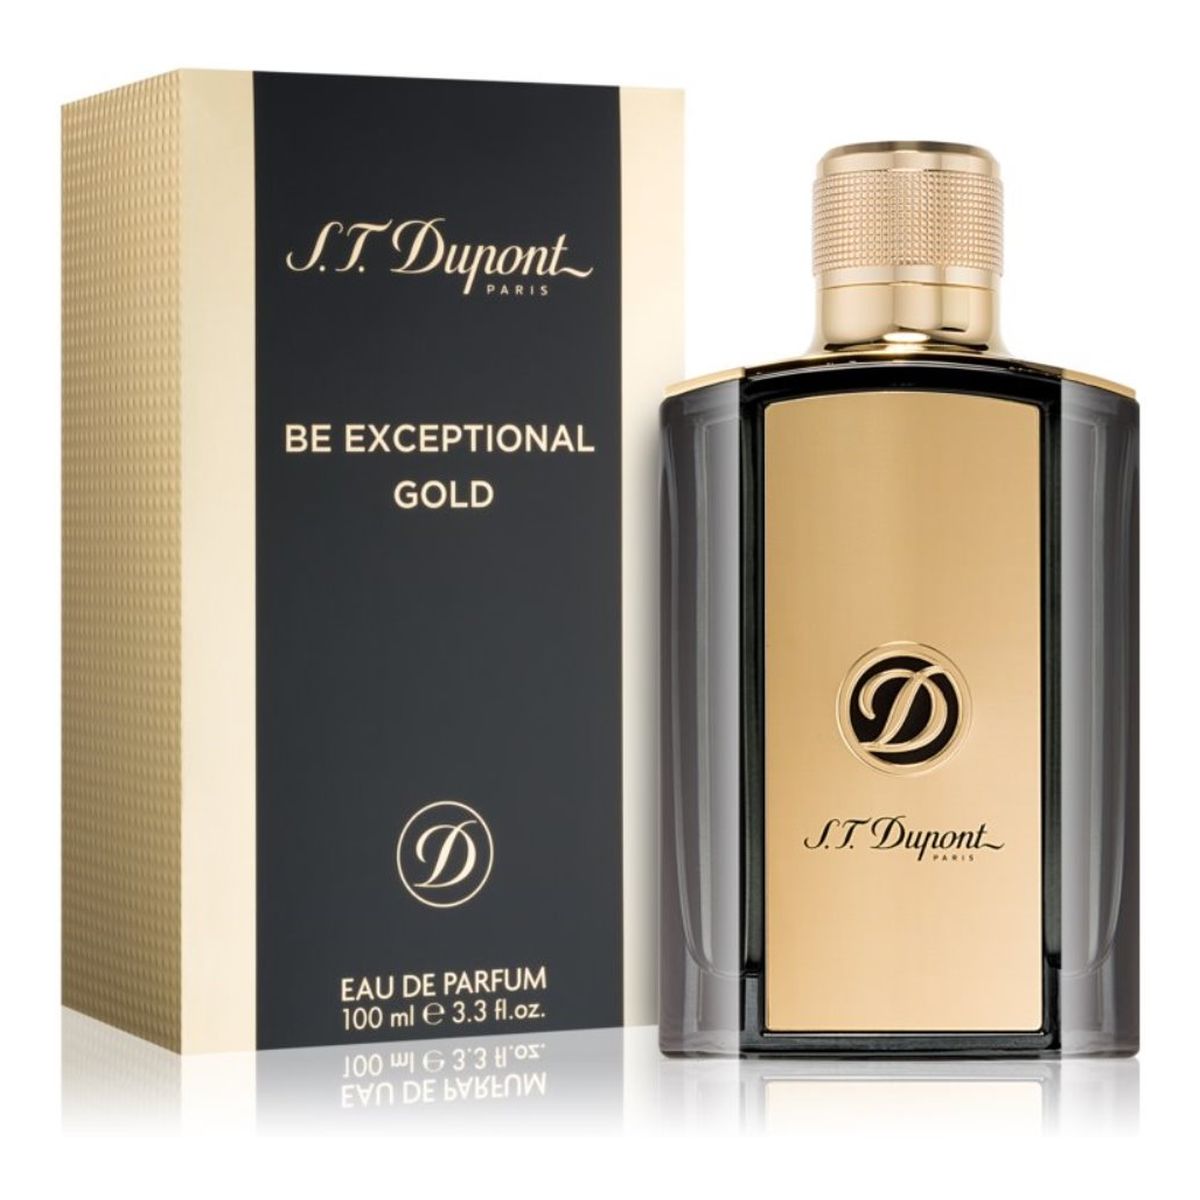 S. T. Dupont Be Exceptional Gold woda perfumowana Tester 100ml